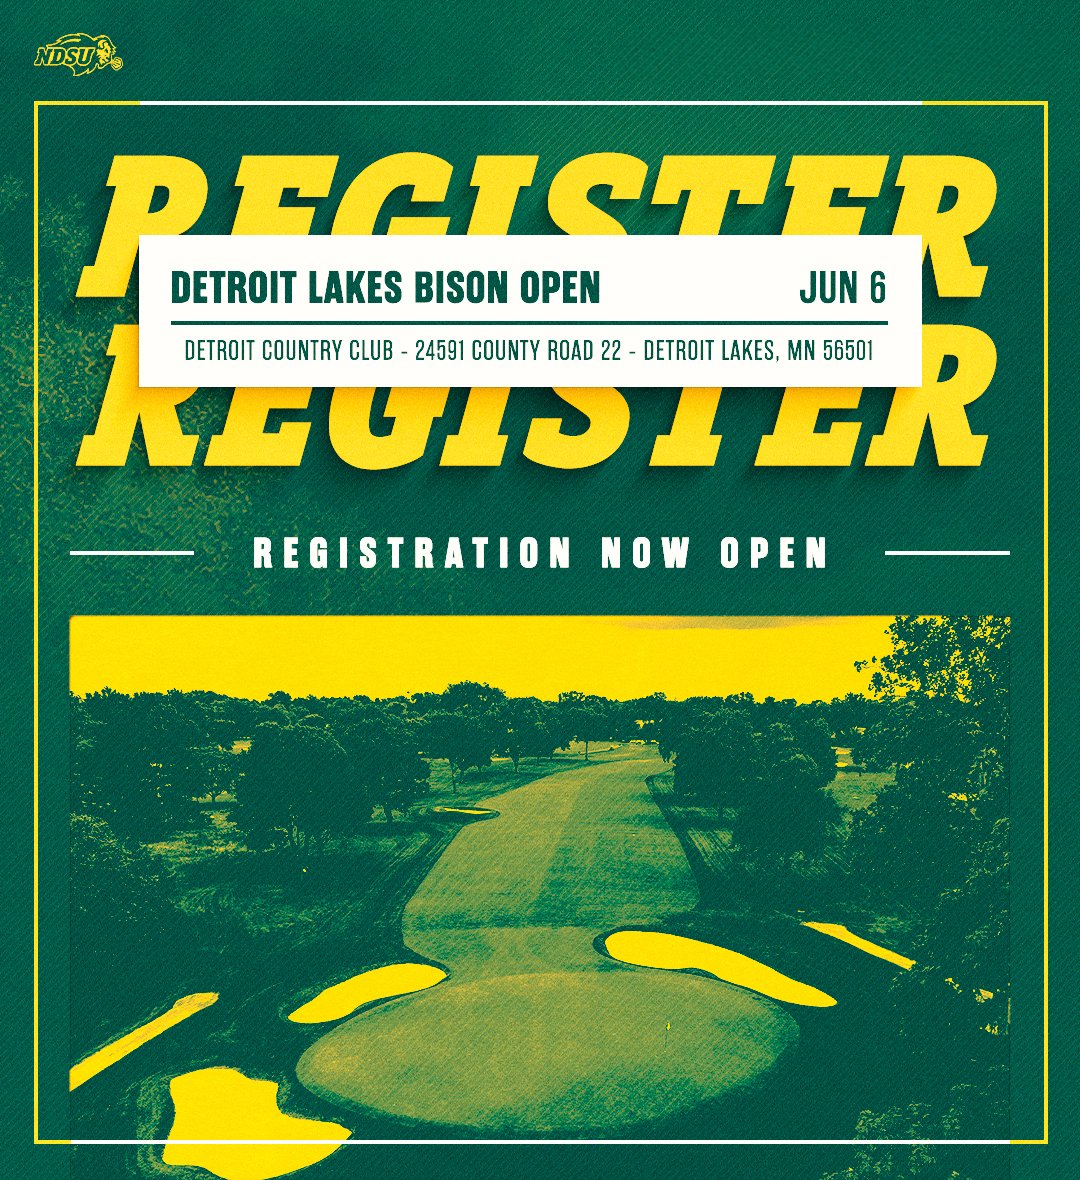 We're 1 Month Away From The Detroit Lakes Bison Open! Registration includes player gift, food, beverages and much more! Click the link below to get your team signed up today! rb.gy/0gb7v1